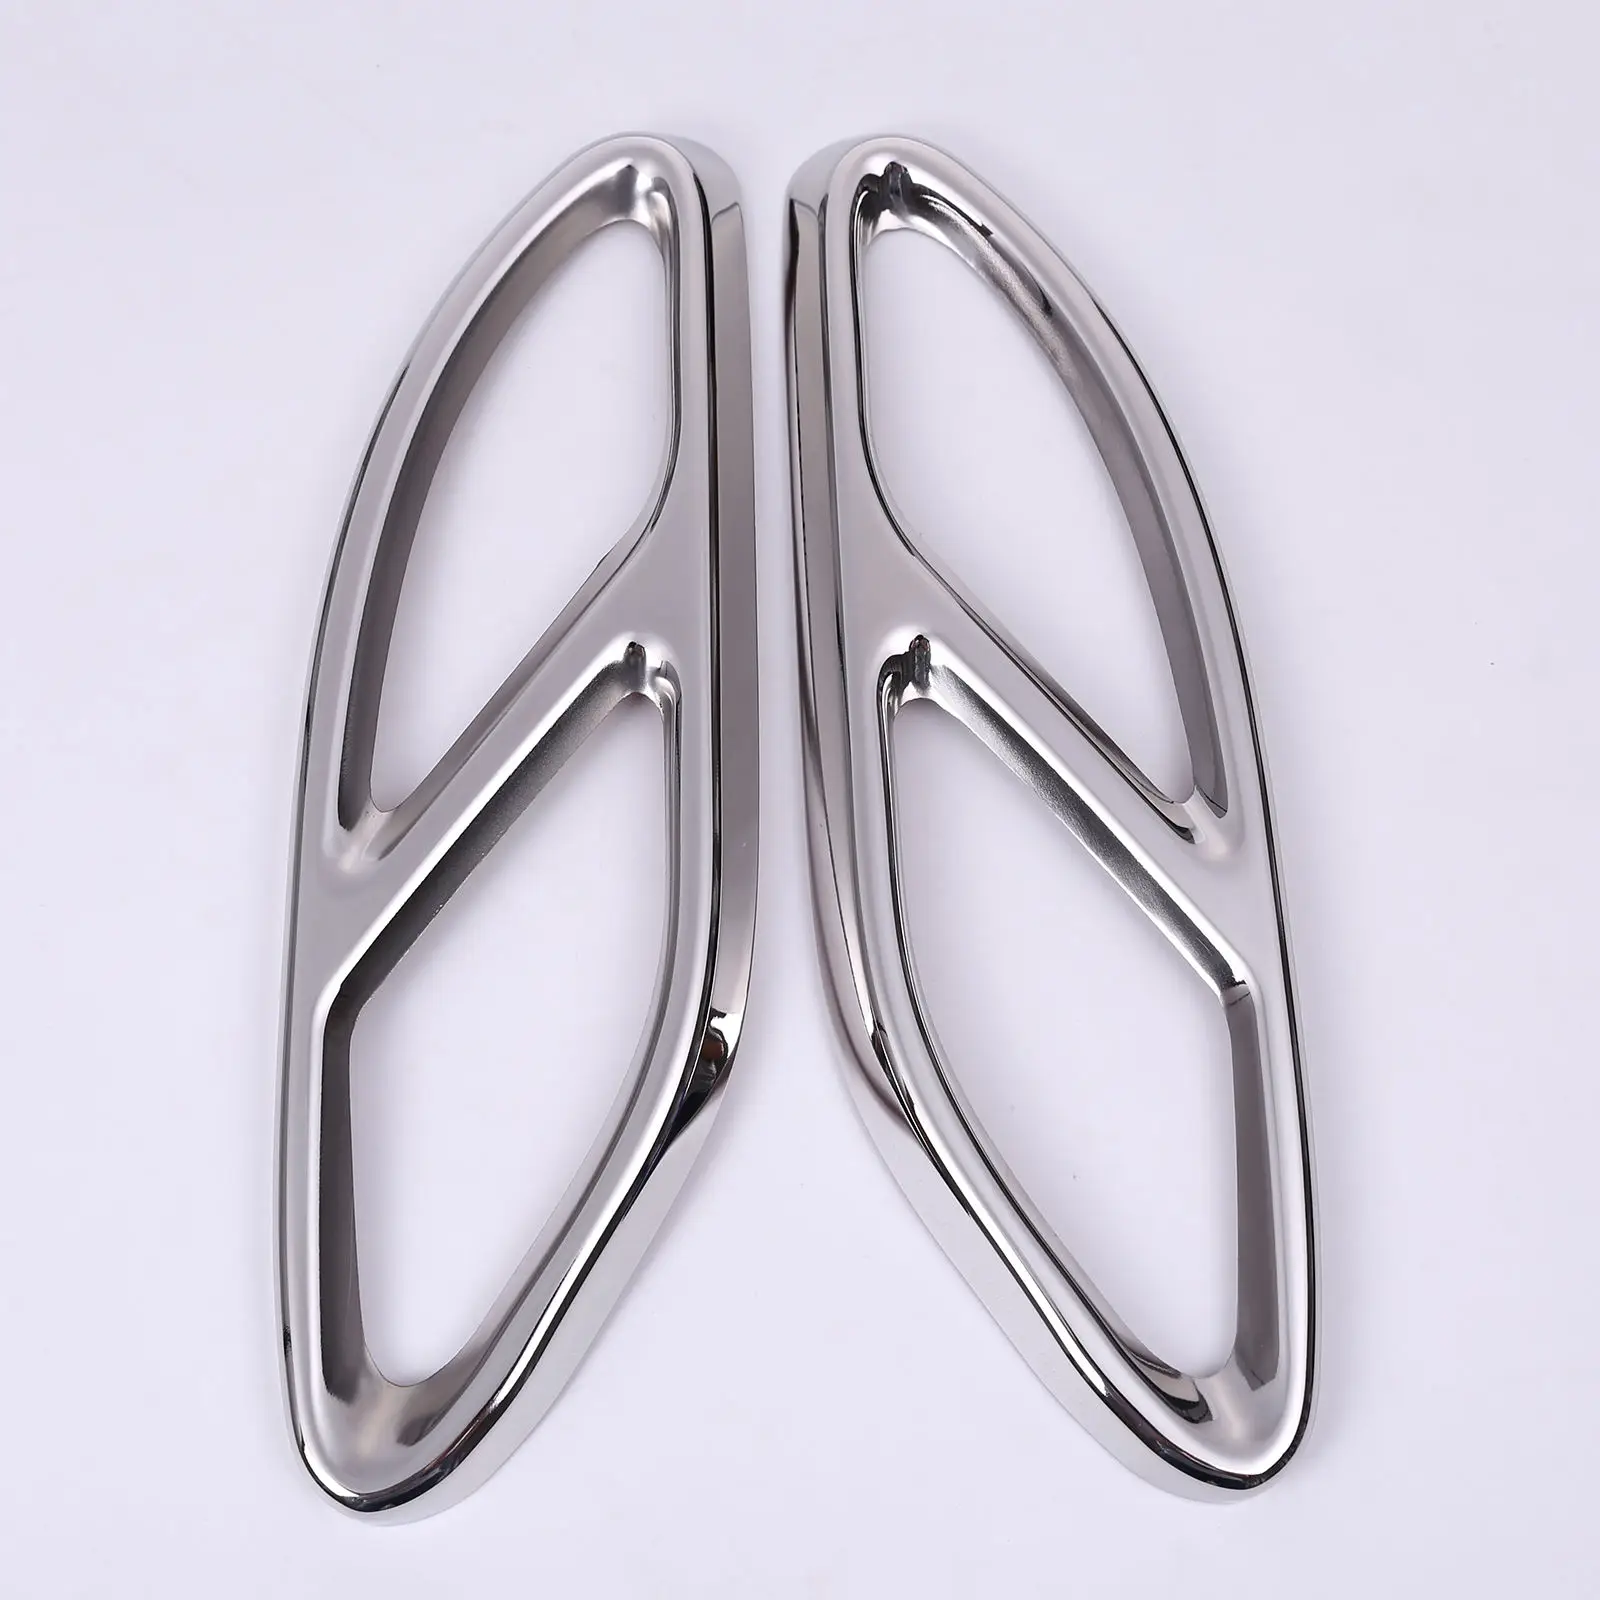 2pcs Exhaust Pipe Cover Stainless Steel Exterior Rear Exhaust Pipe Trim Fit for B Class W246 2015-2019